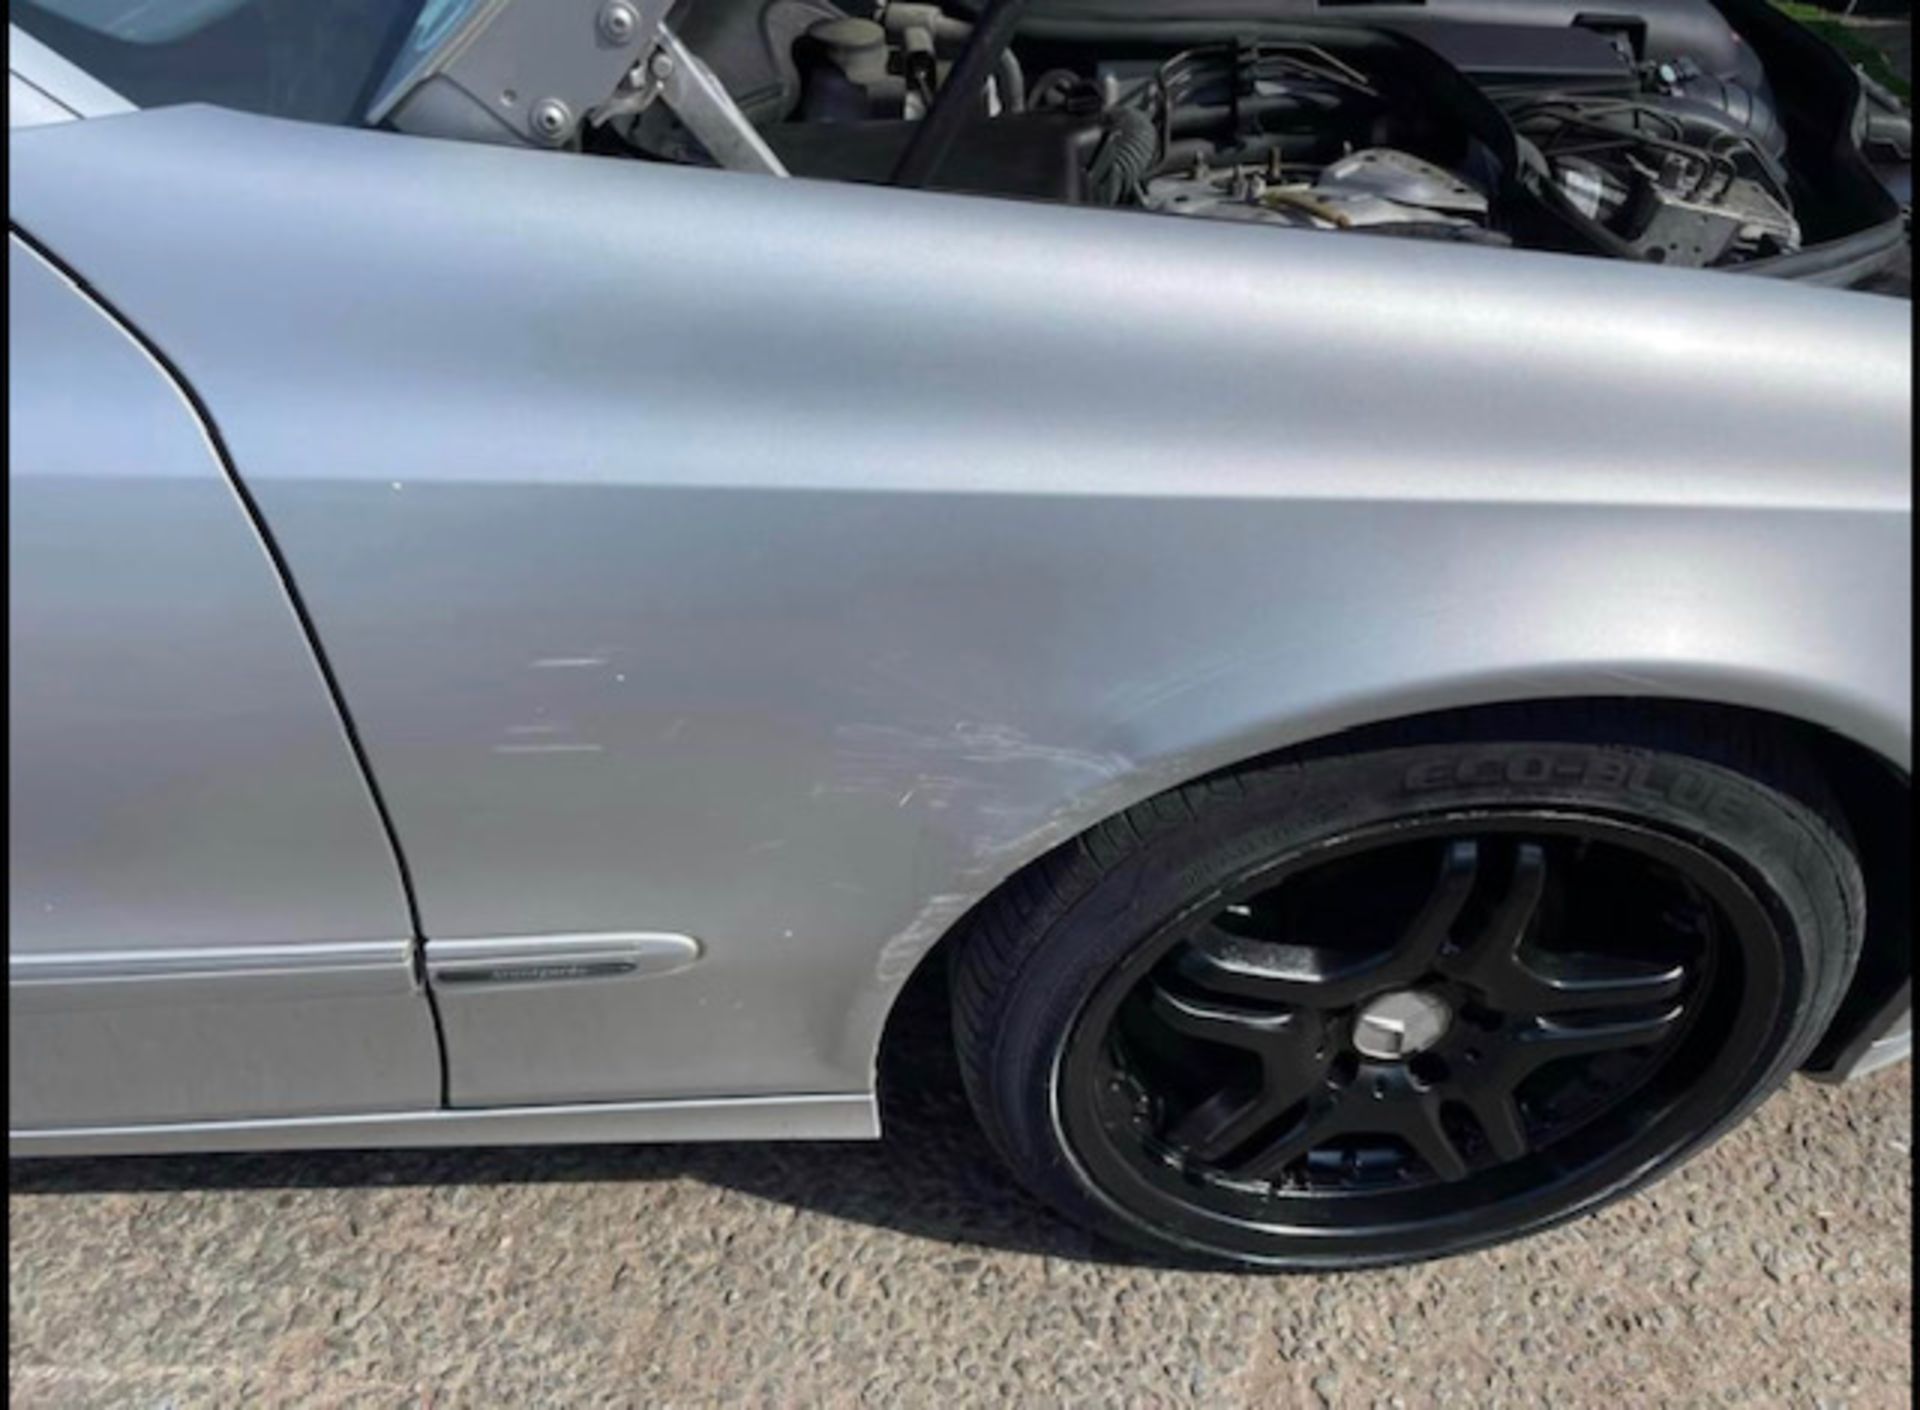 Mercedes E320 CDI 103k genuine miles , mot untill aug 23 as per pictures has scratches as shown in - Image 9 of 14